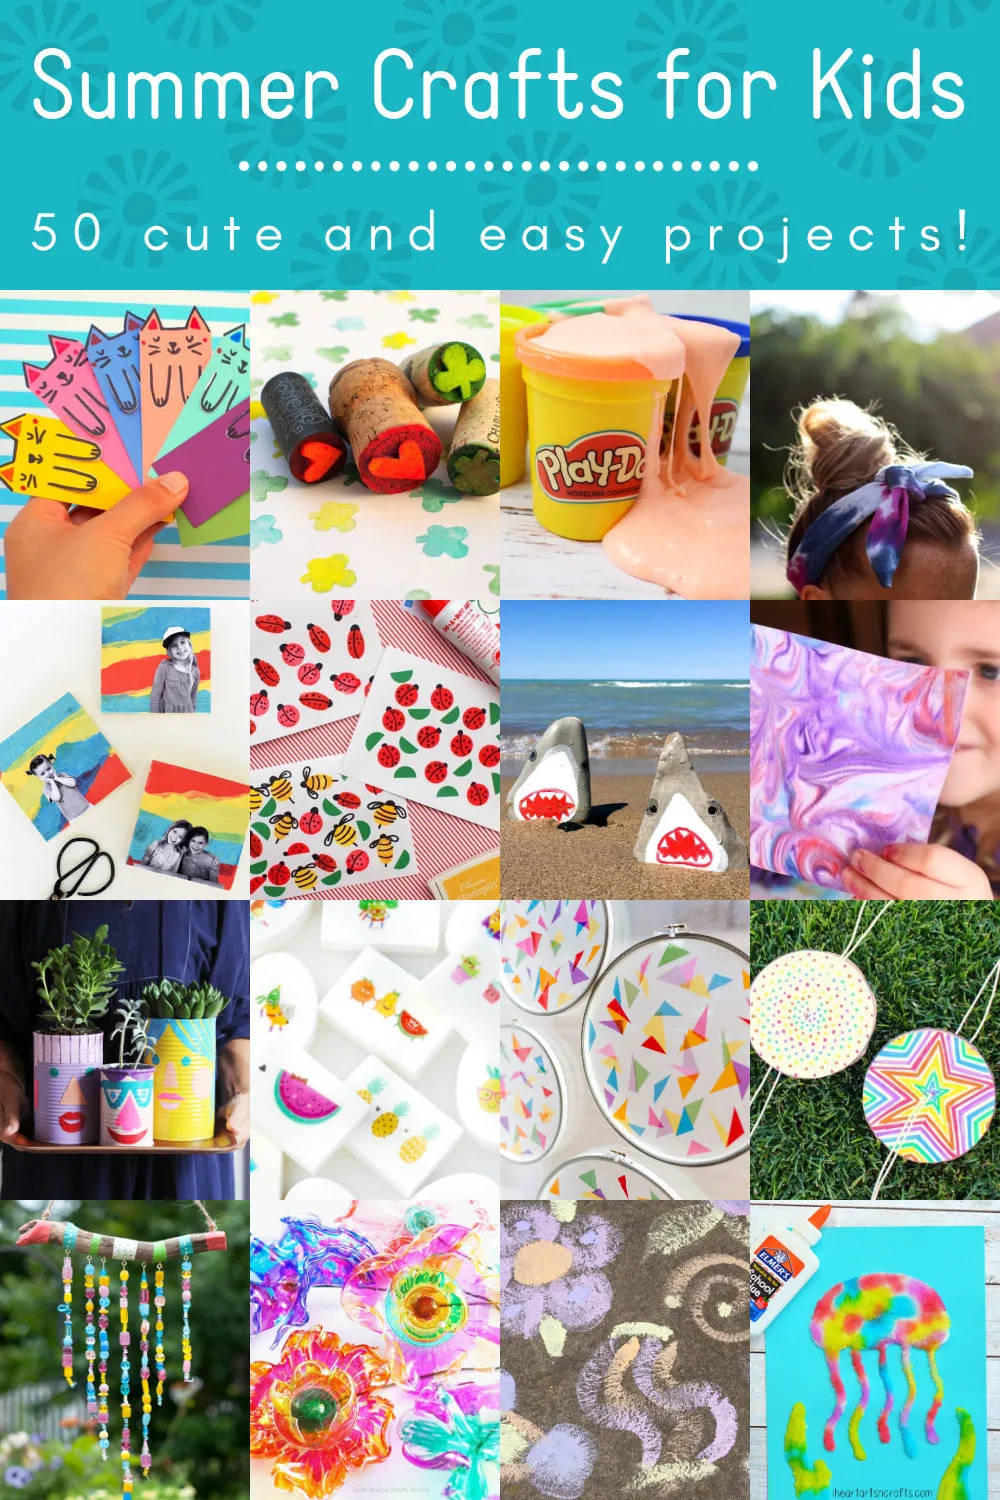 Summer Crafts for Kids: 50 Fun Projects They'll Love - DIY Candy